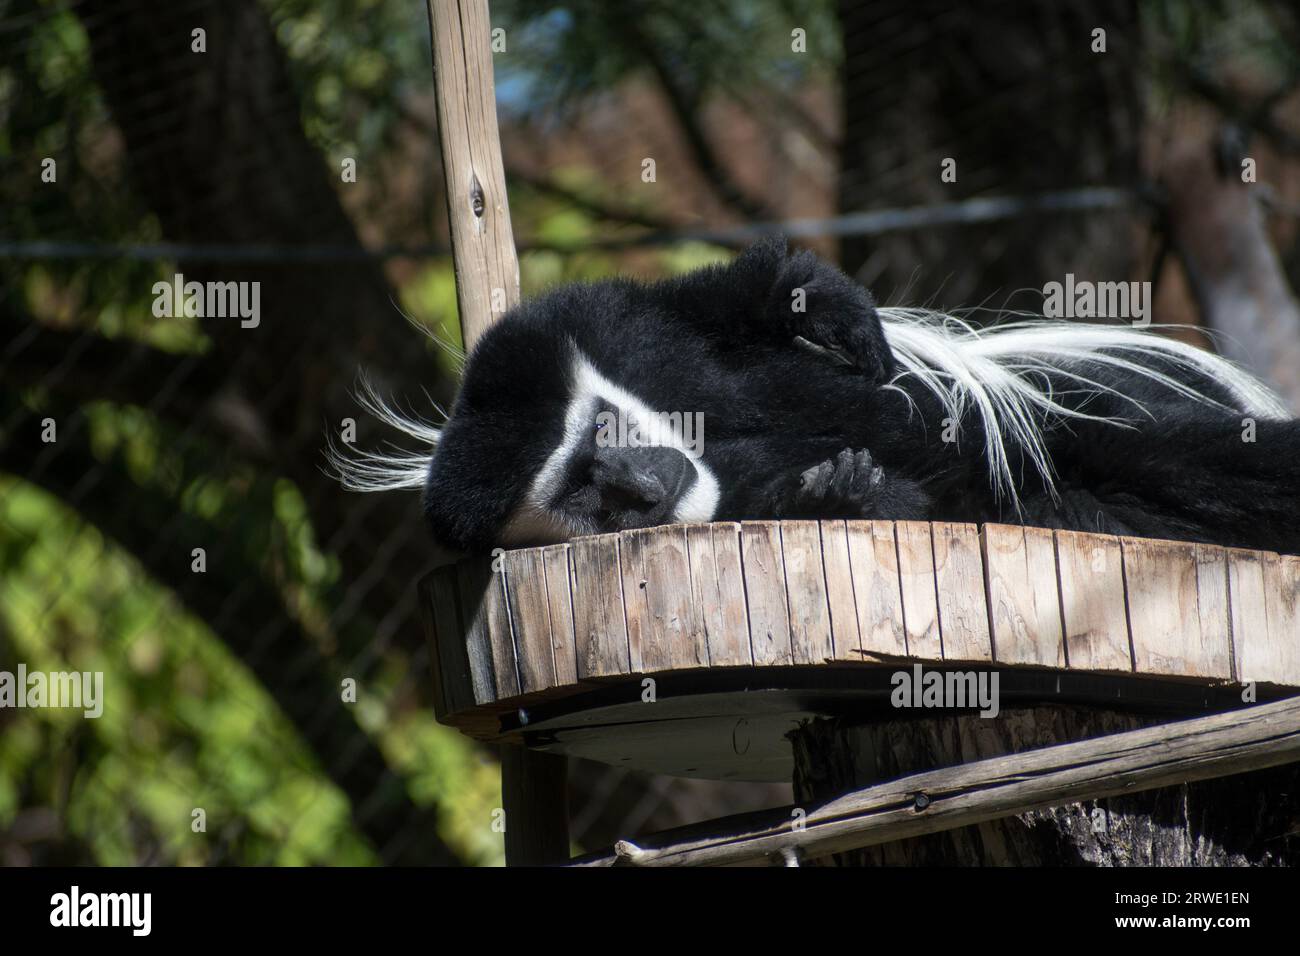 An old world Colobus Monkey, with black and white fur, at the Utah Zoo enclosure. Stock Photo